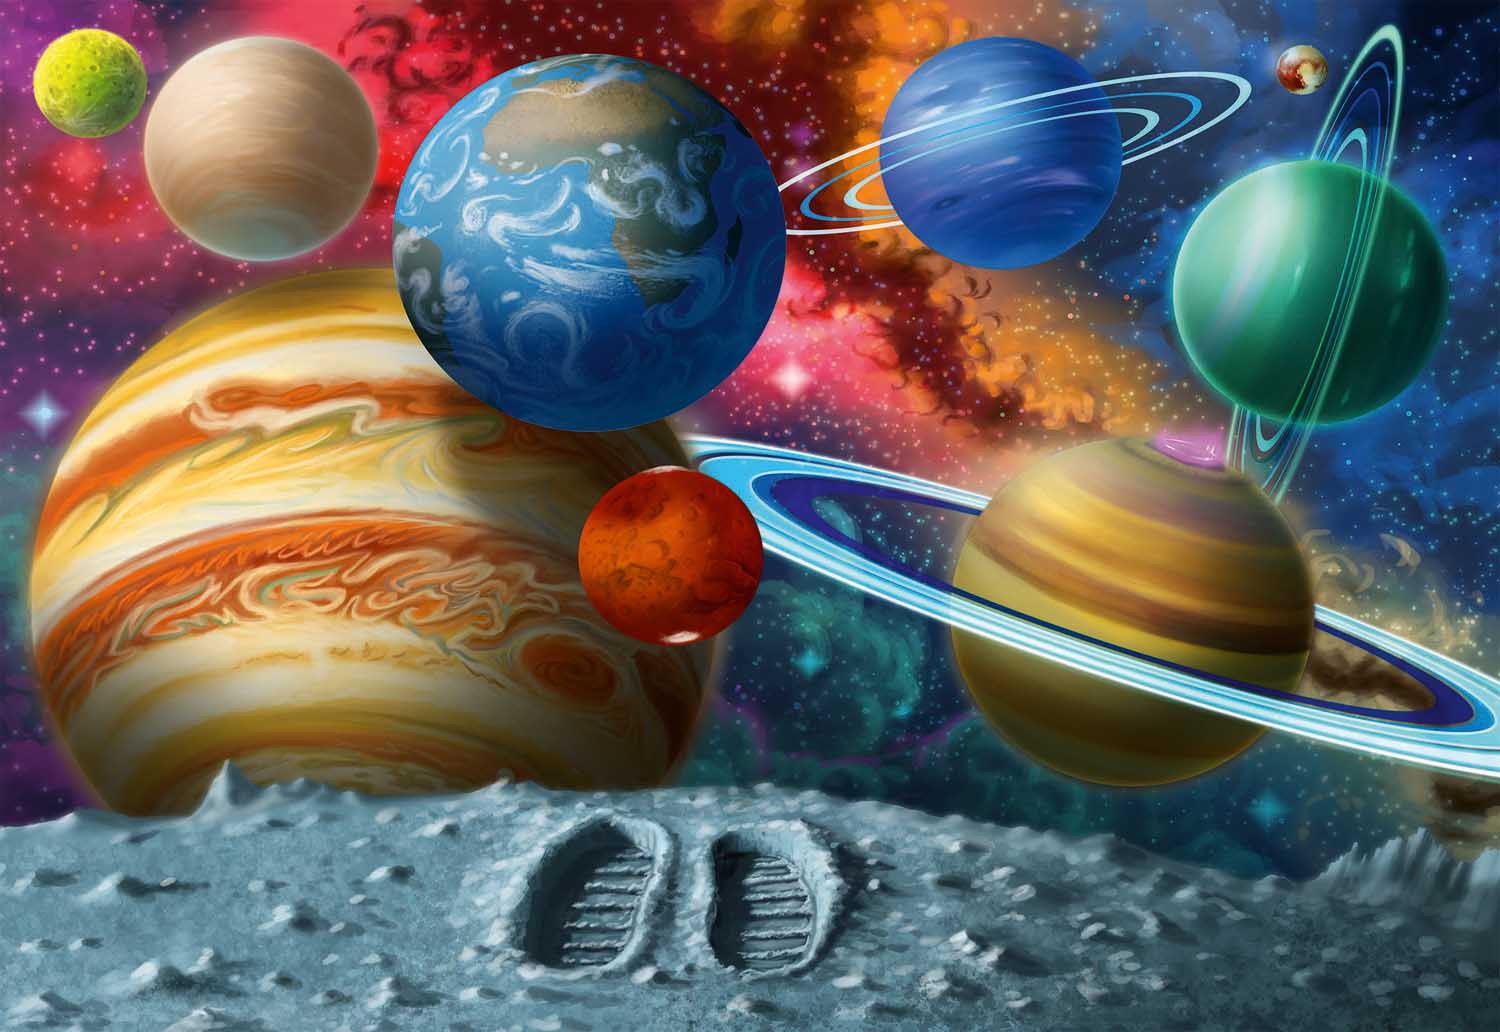 Stepping Into Space Space Jigsaw Puzzle